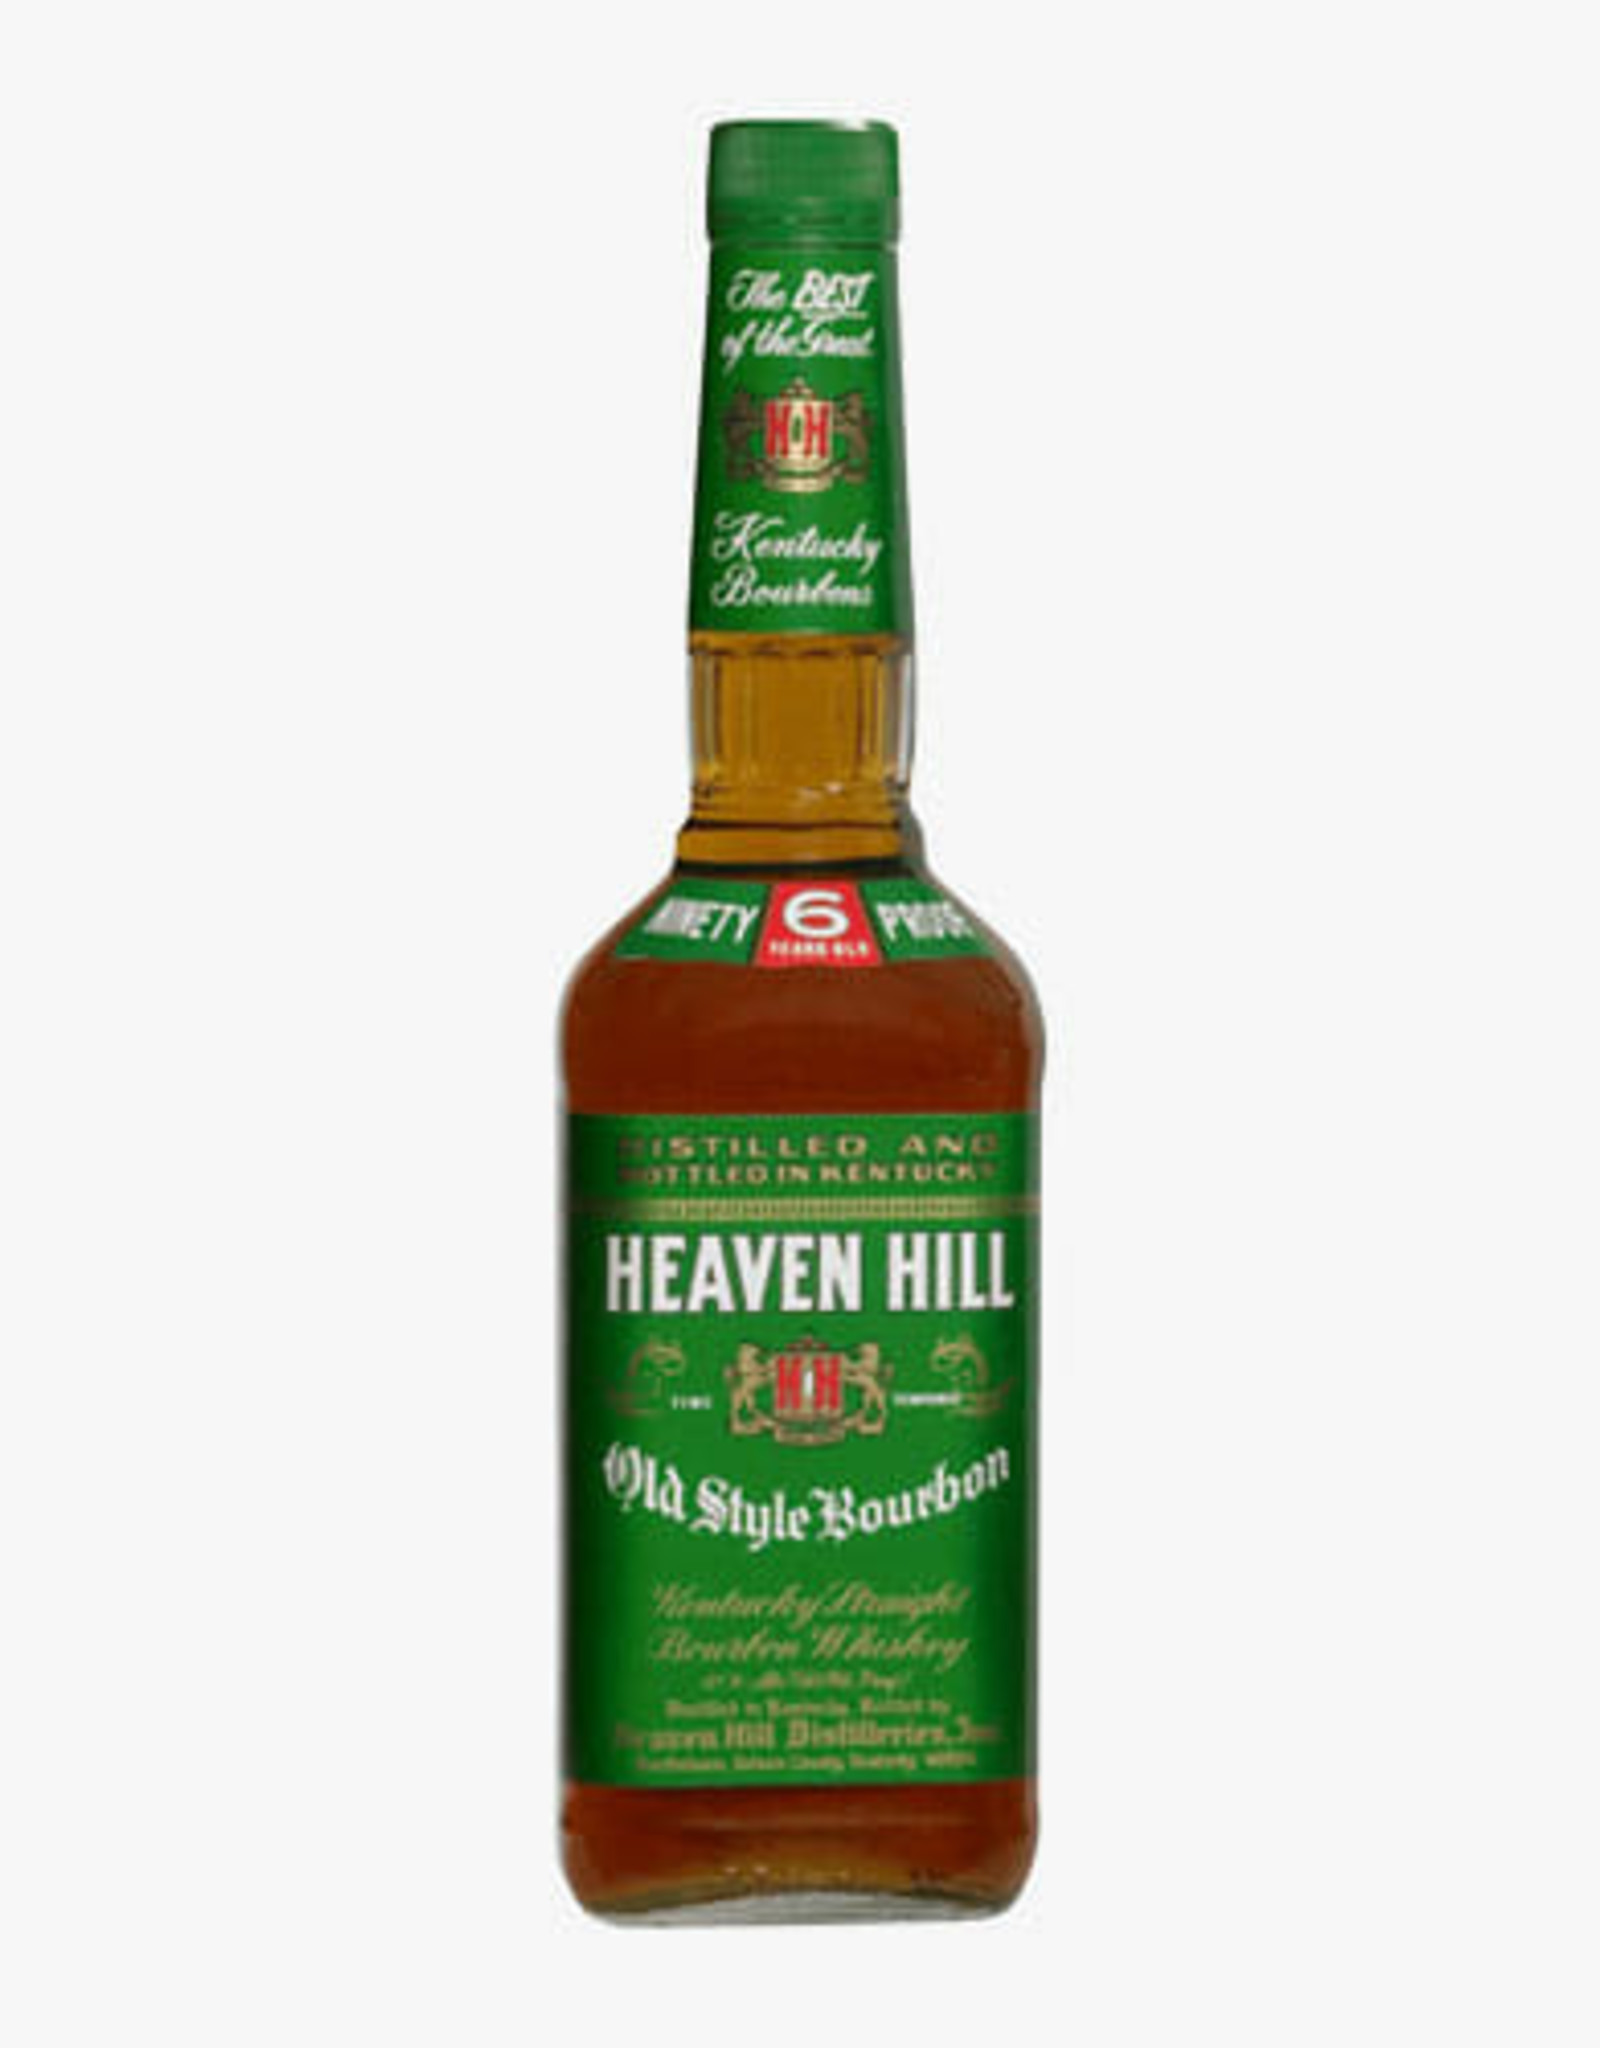 Heaven Hill Heaven Hill Old Style Kentucky Blended Whiskey